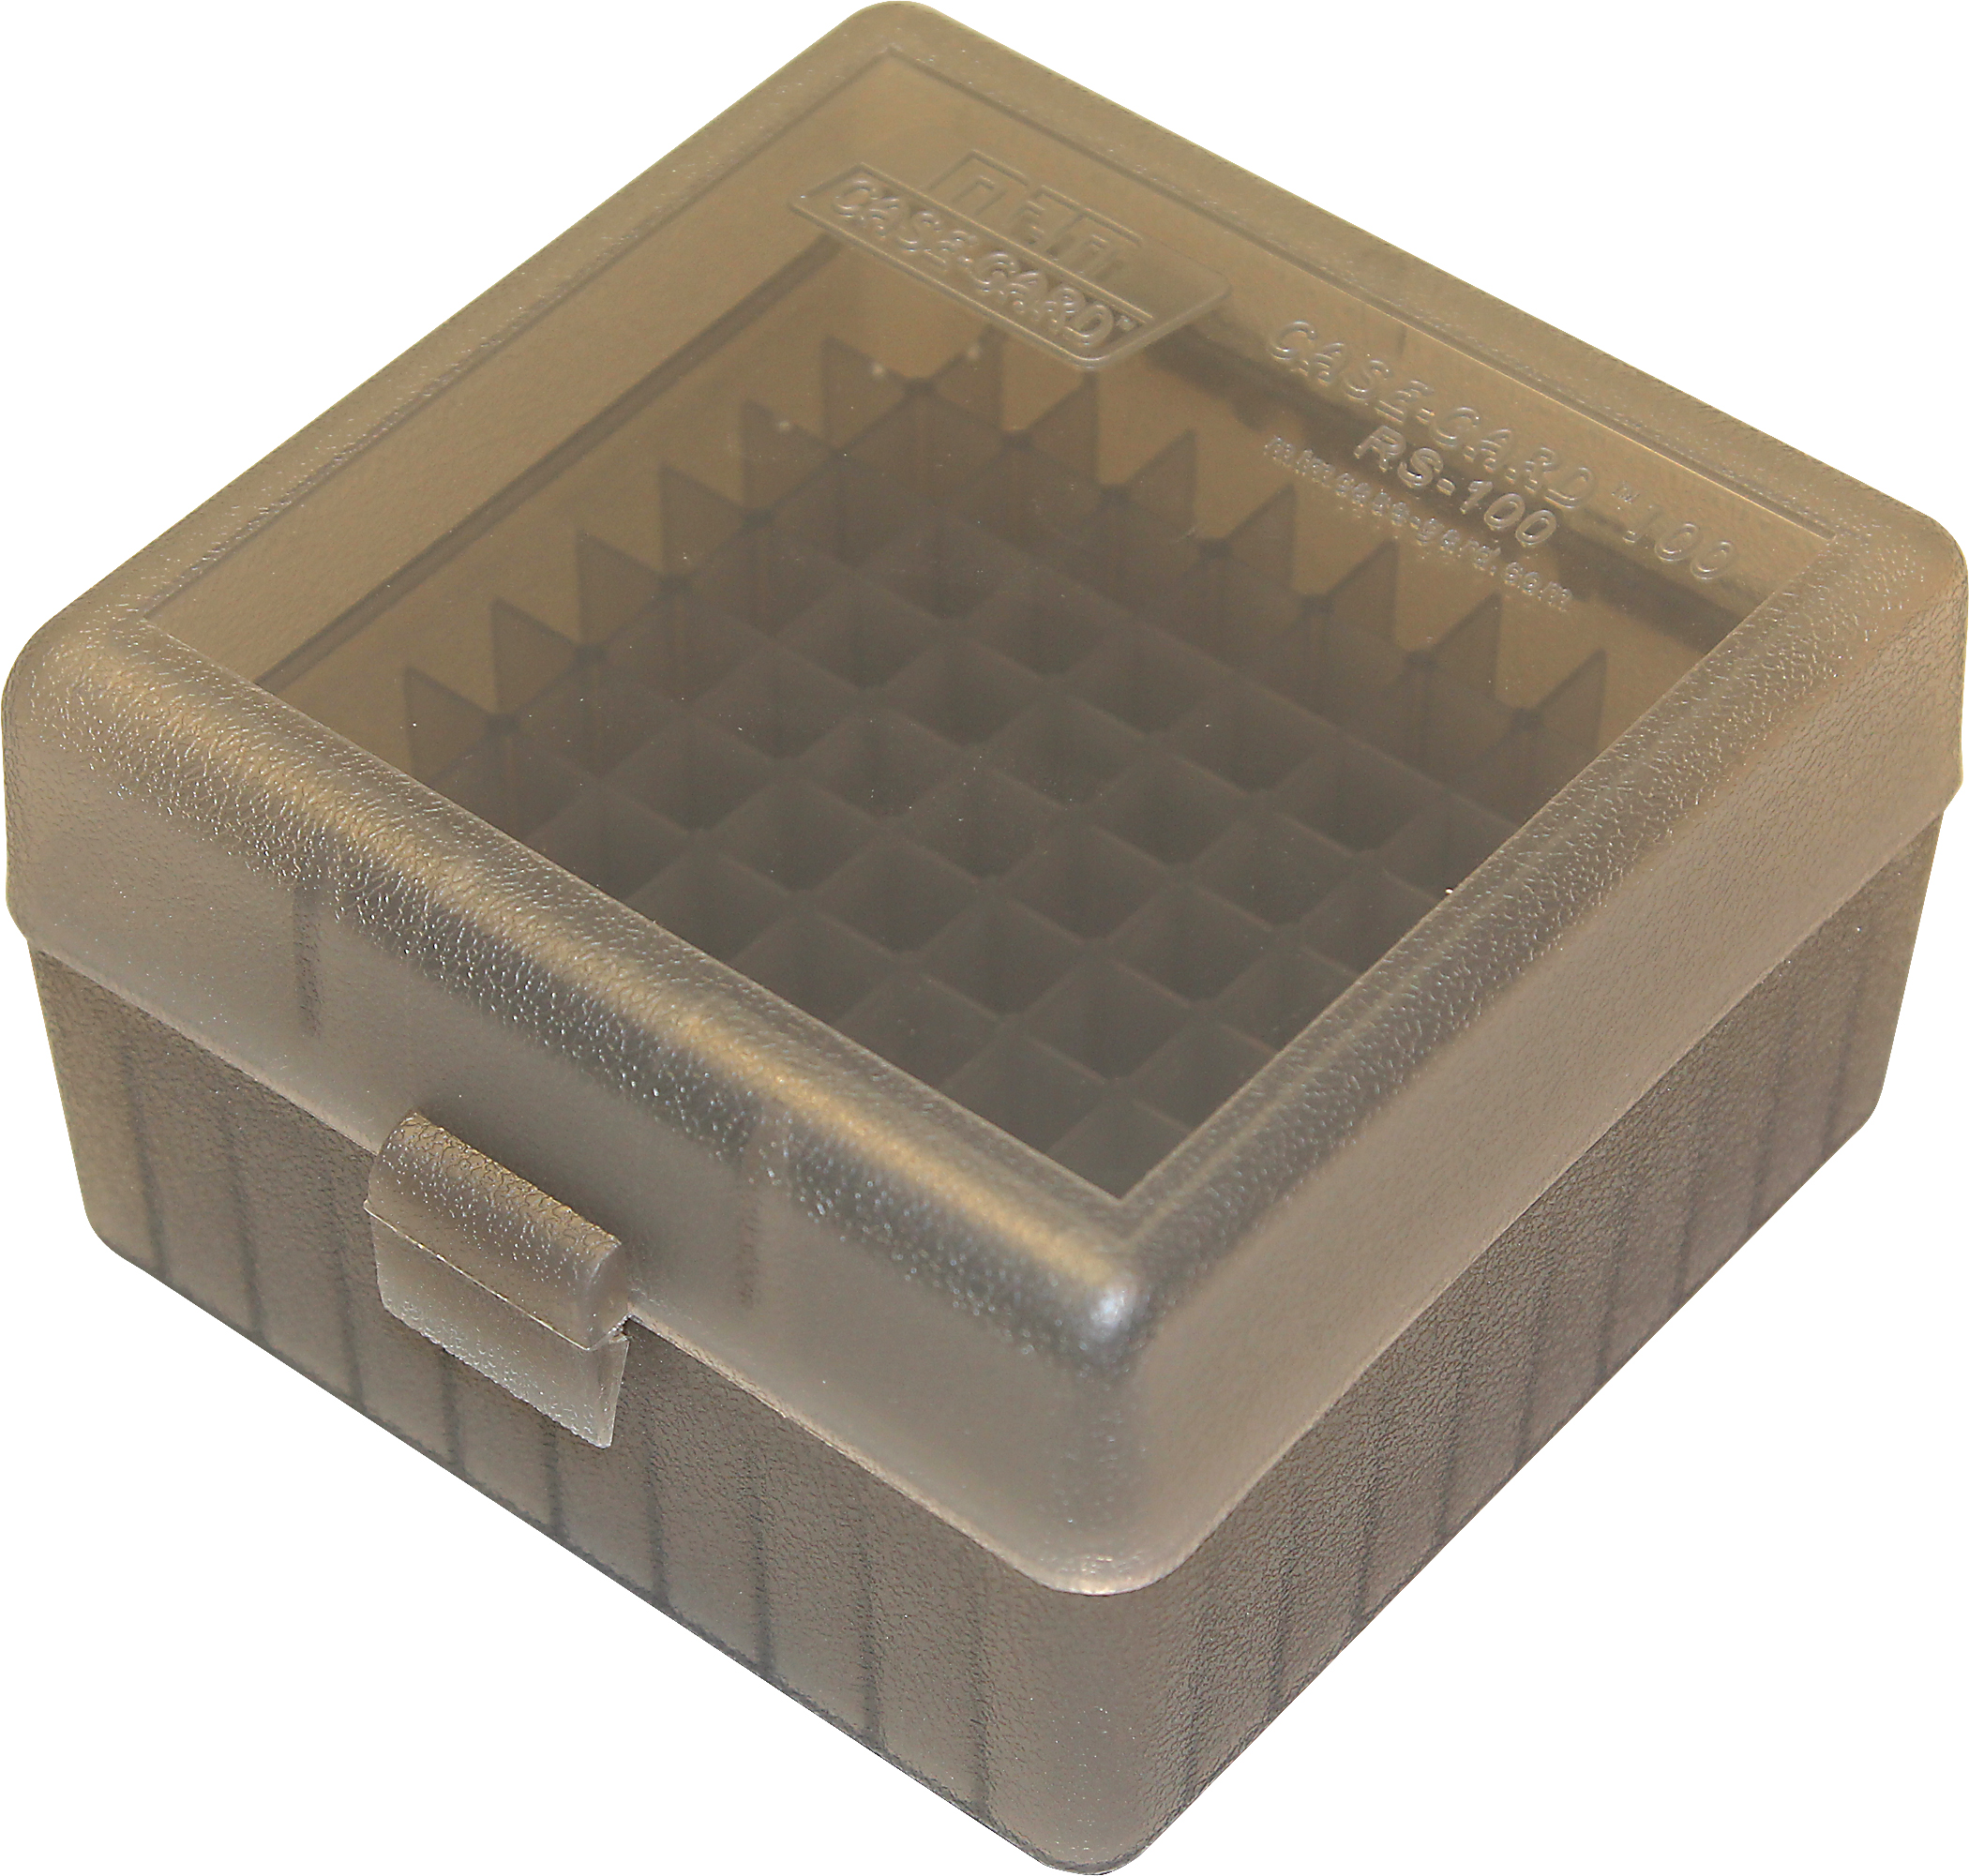 MTM RS10041 Ammo Box 100 Round Flip-Top 223 204 Ruger 6X47 Clear Smoke 